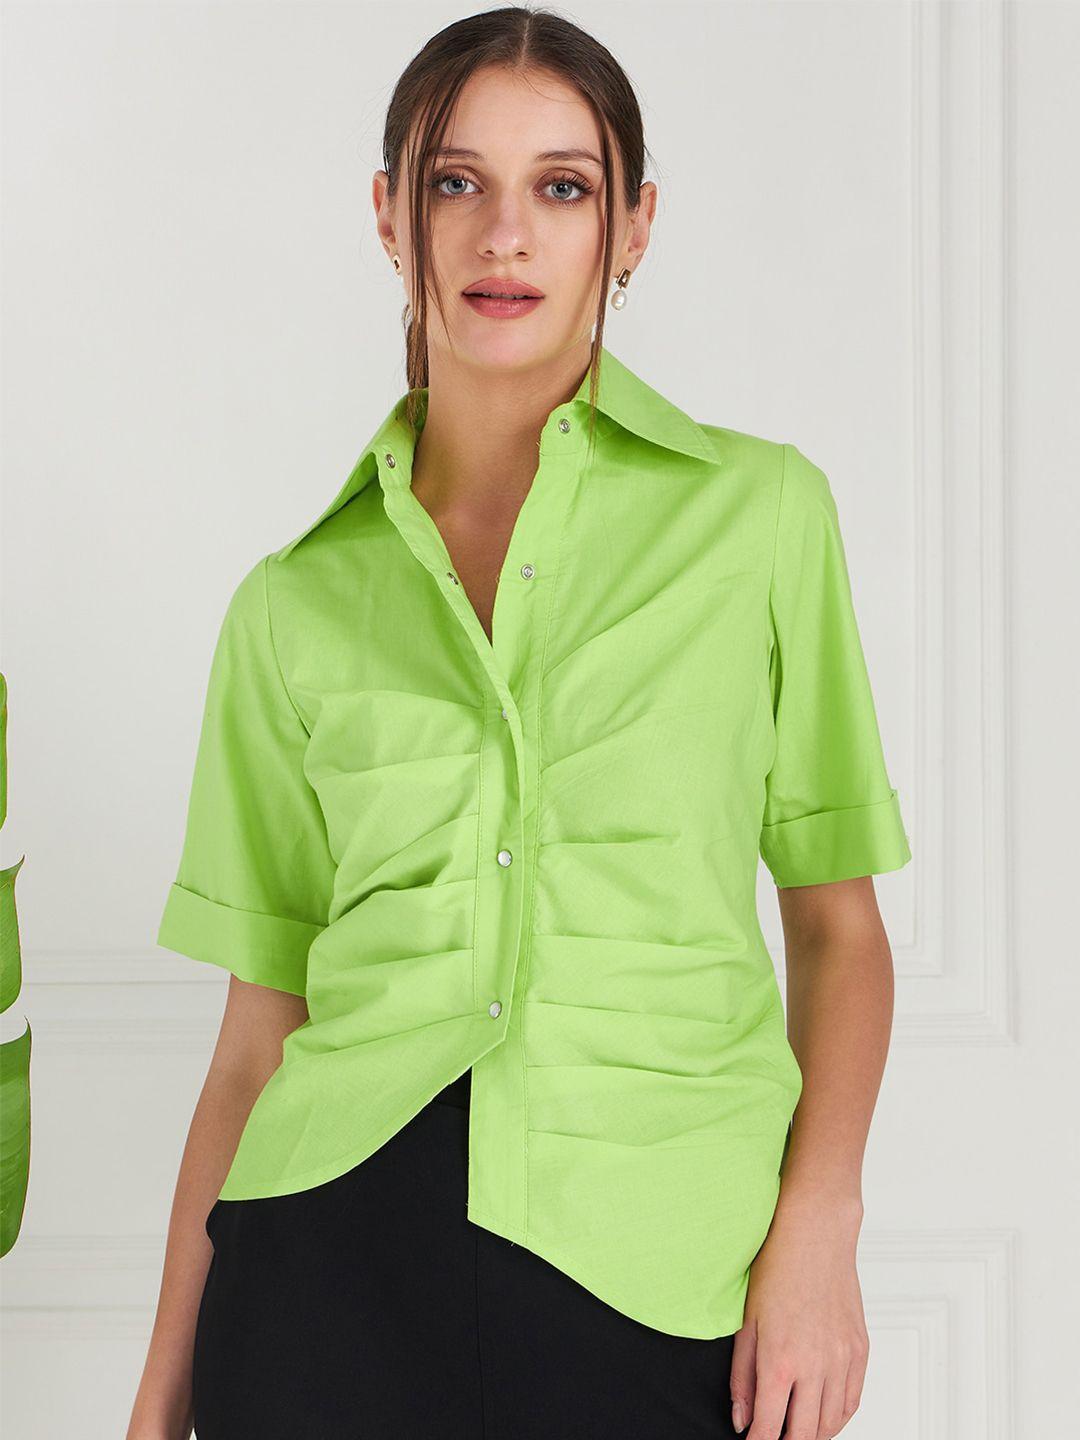 athena-green-pleated-pure-cotton-shirt-style-top